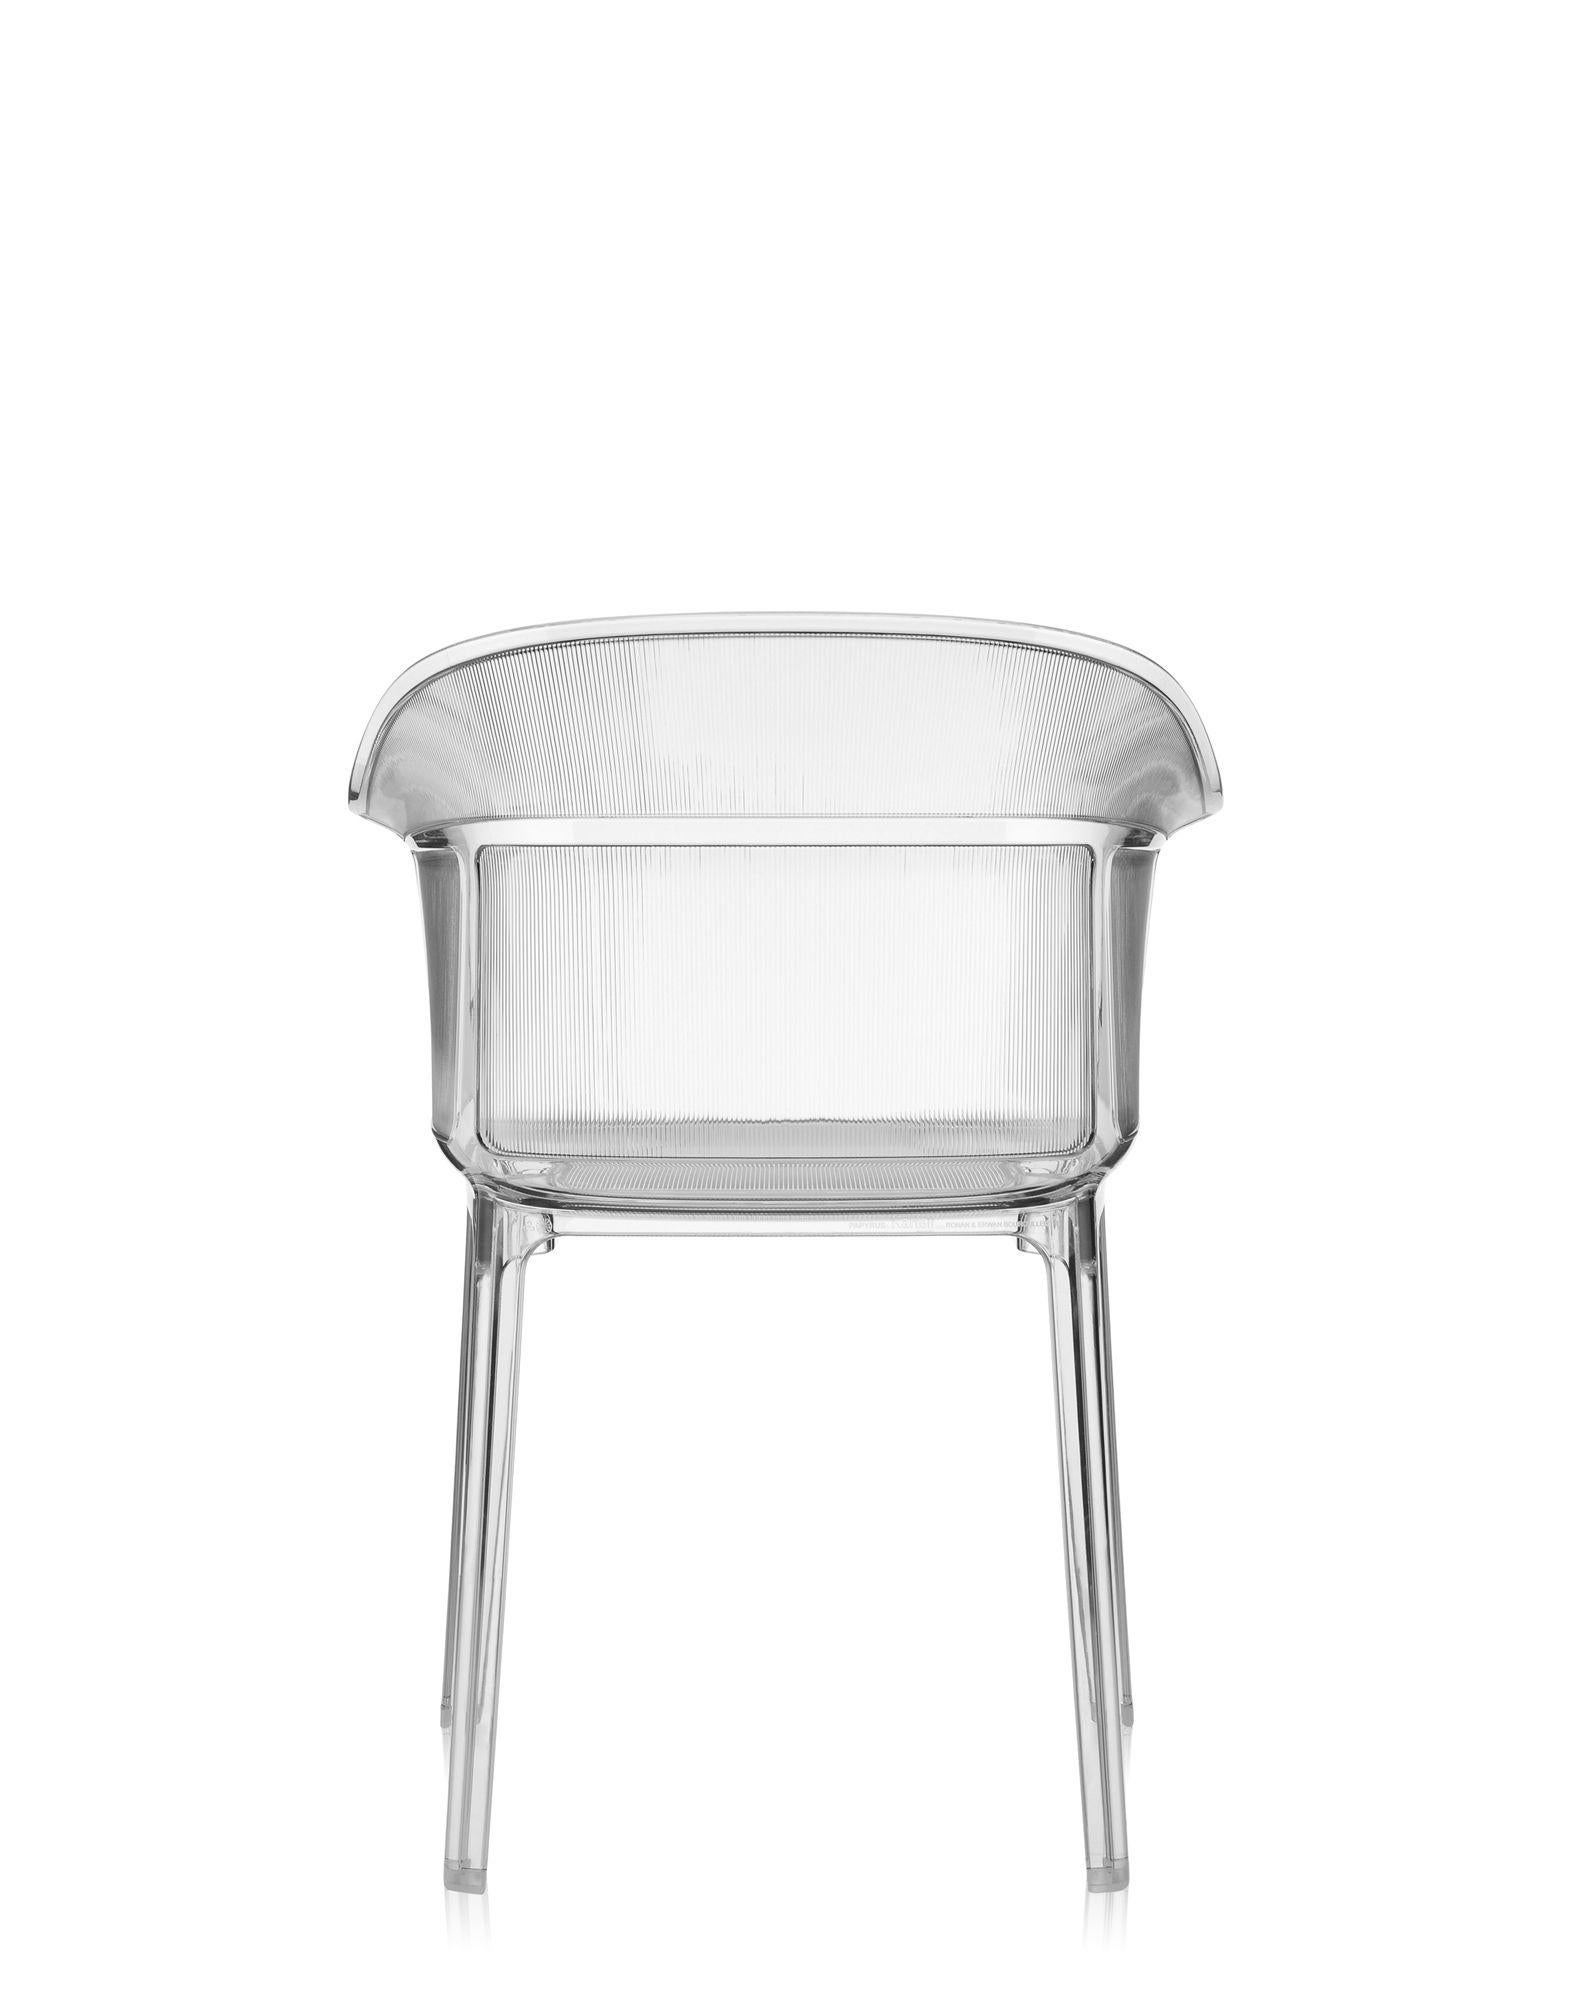 Set of 2 Kartell Papyrus Chair in Crystal by Ronan & Erwan Bouroullec In New Condition For Sale In Brooklyn, NY